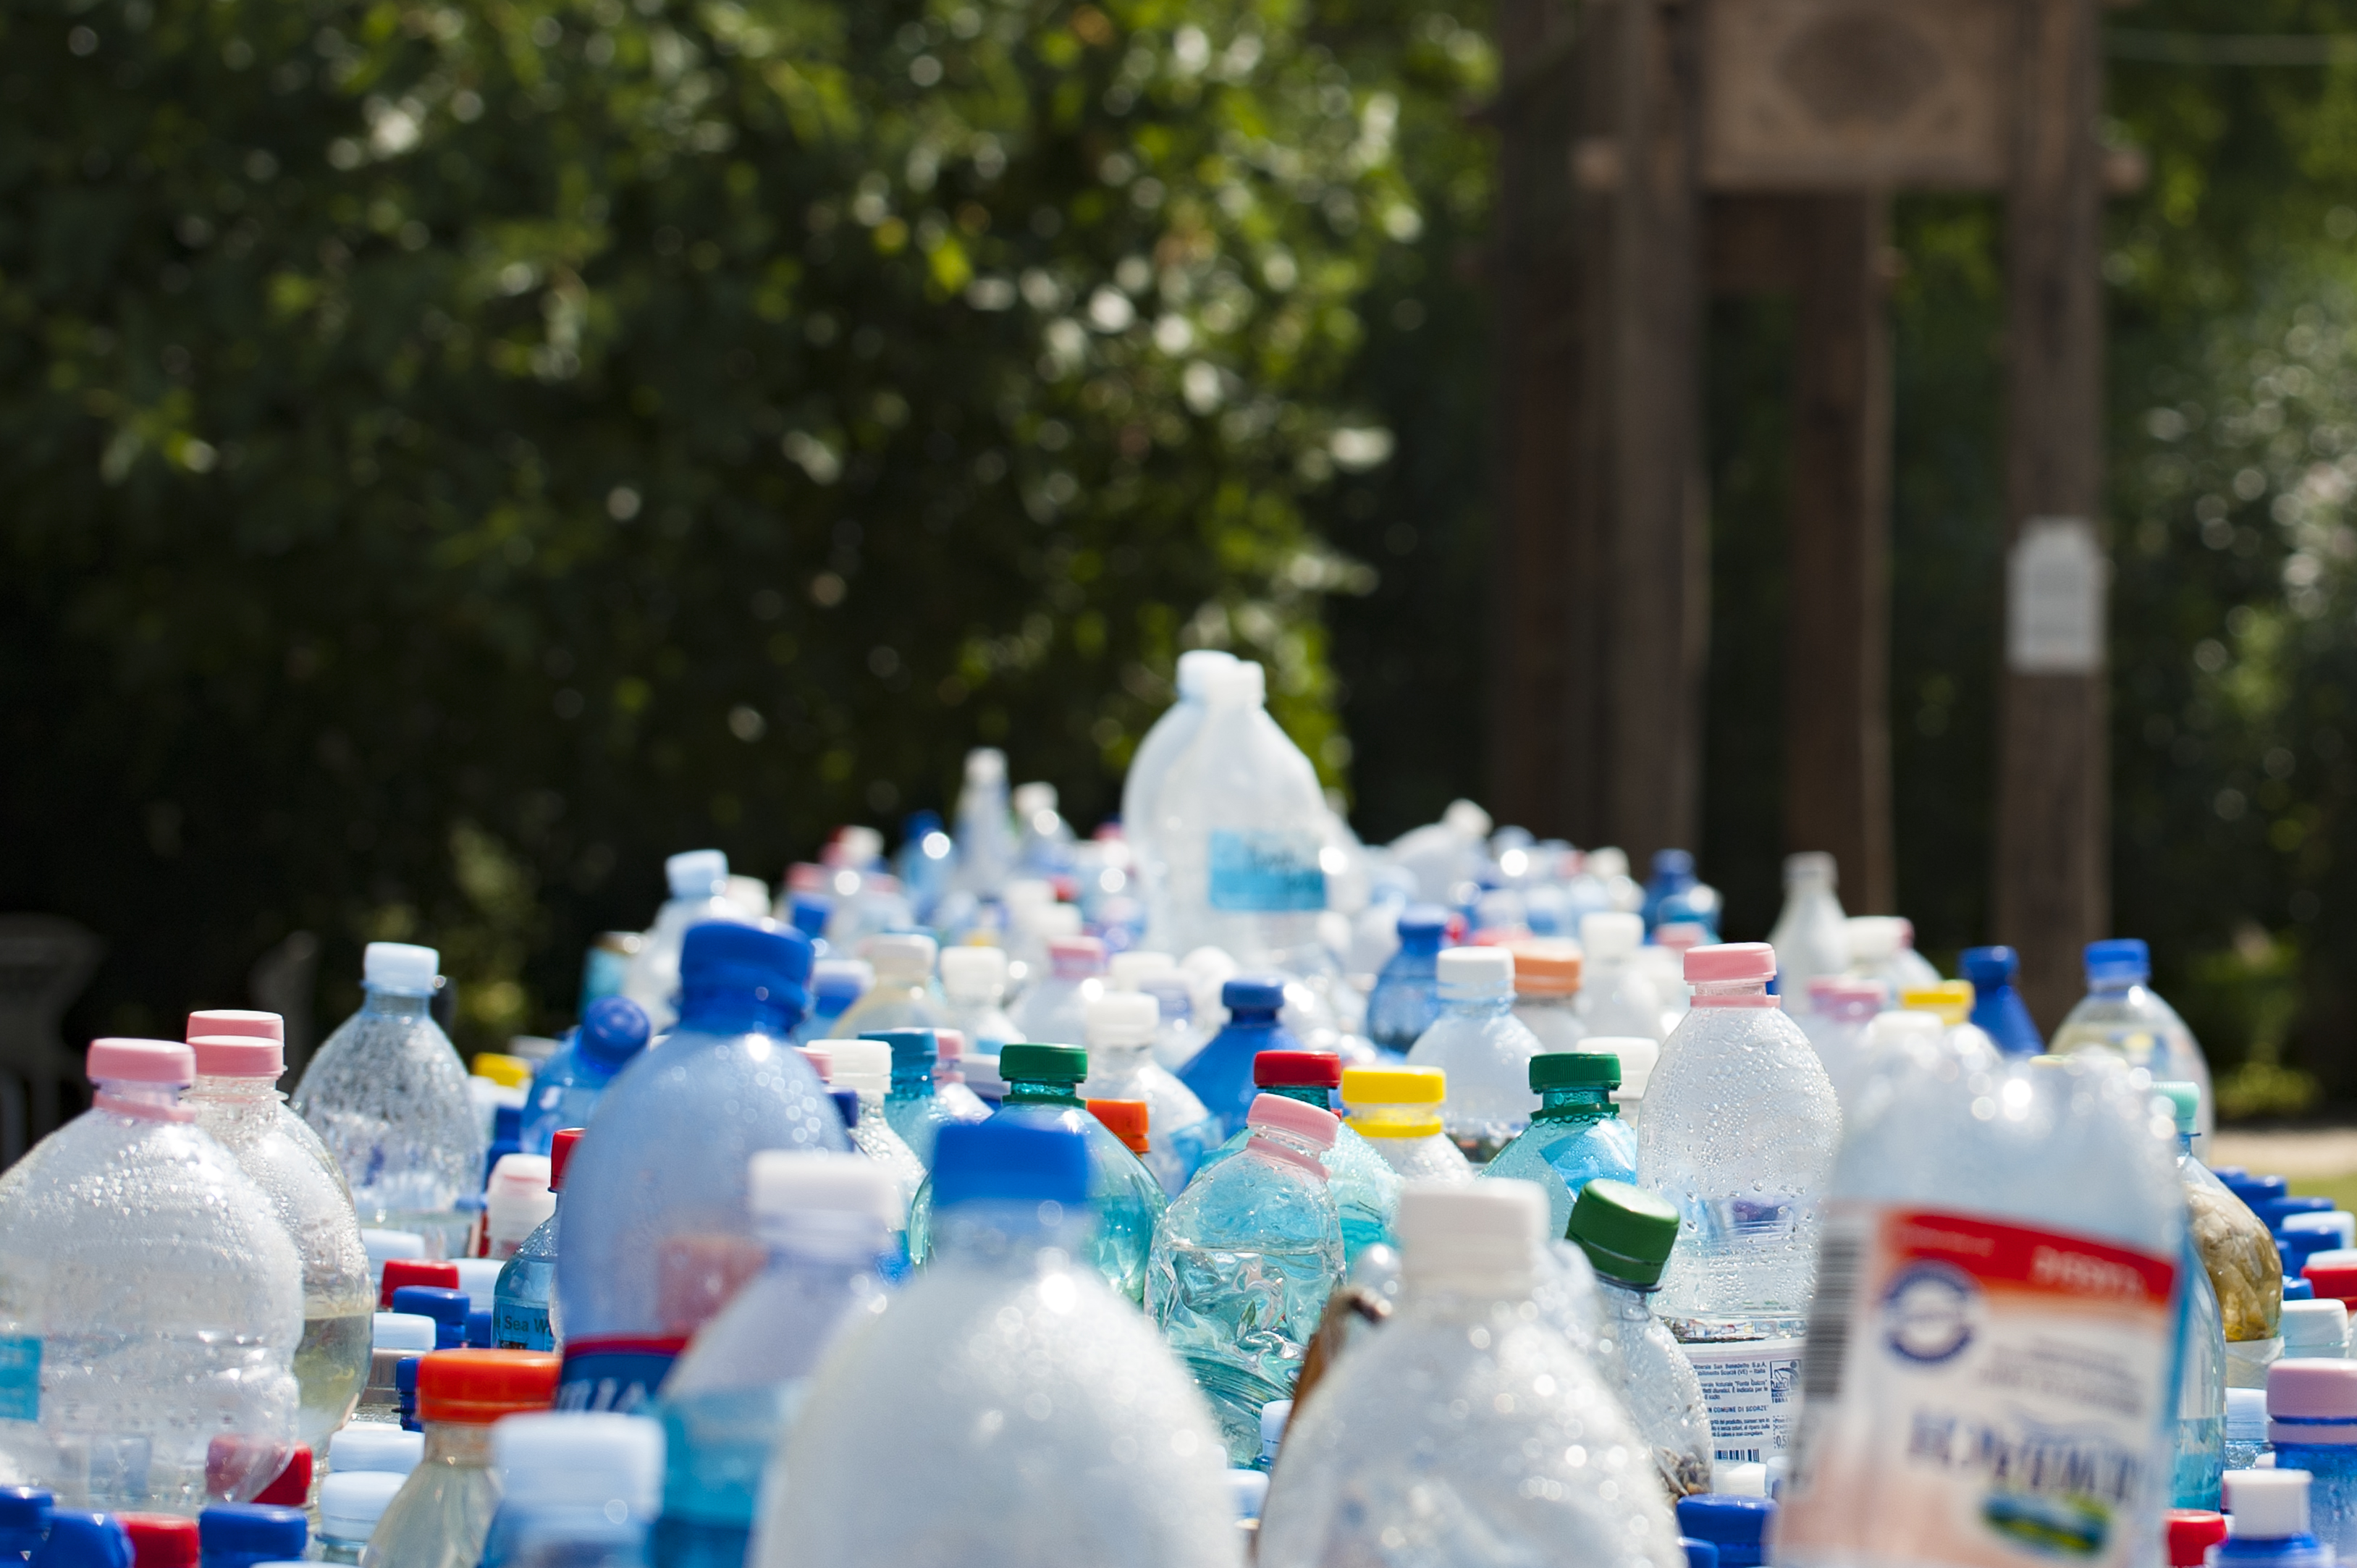 Exposure to Chemical Found in Plastics ‘Hard to Avoid’ in Everyday Life